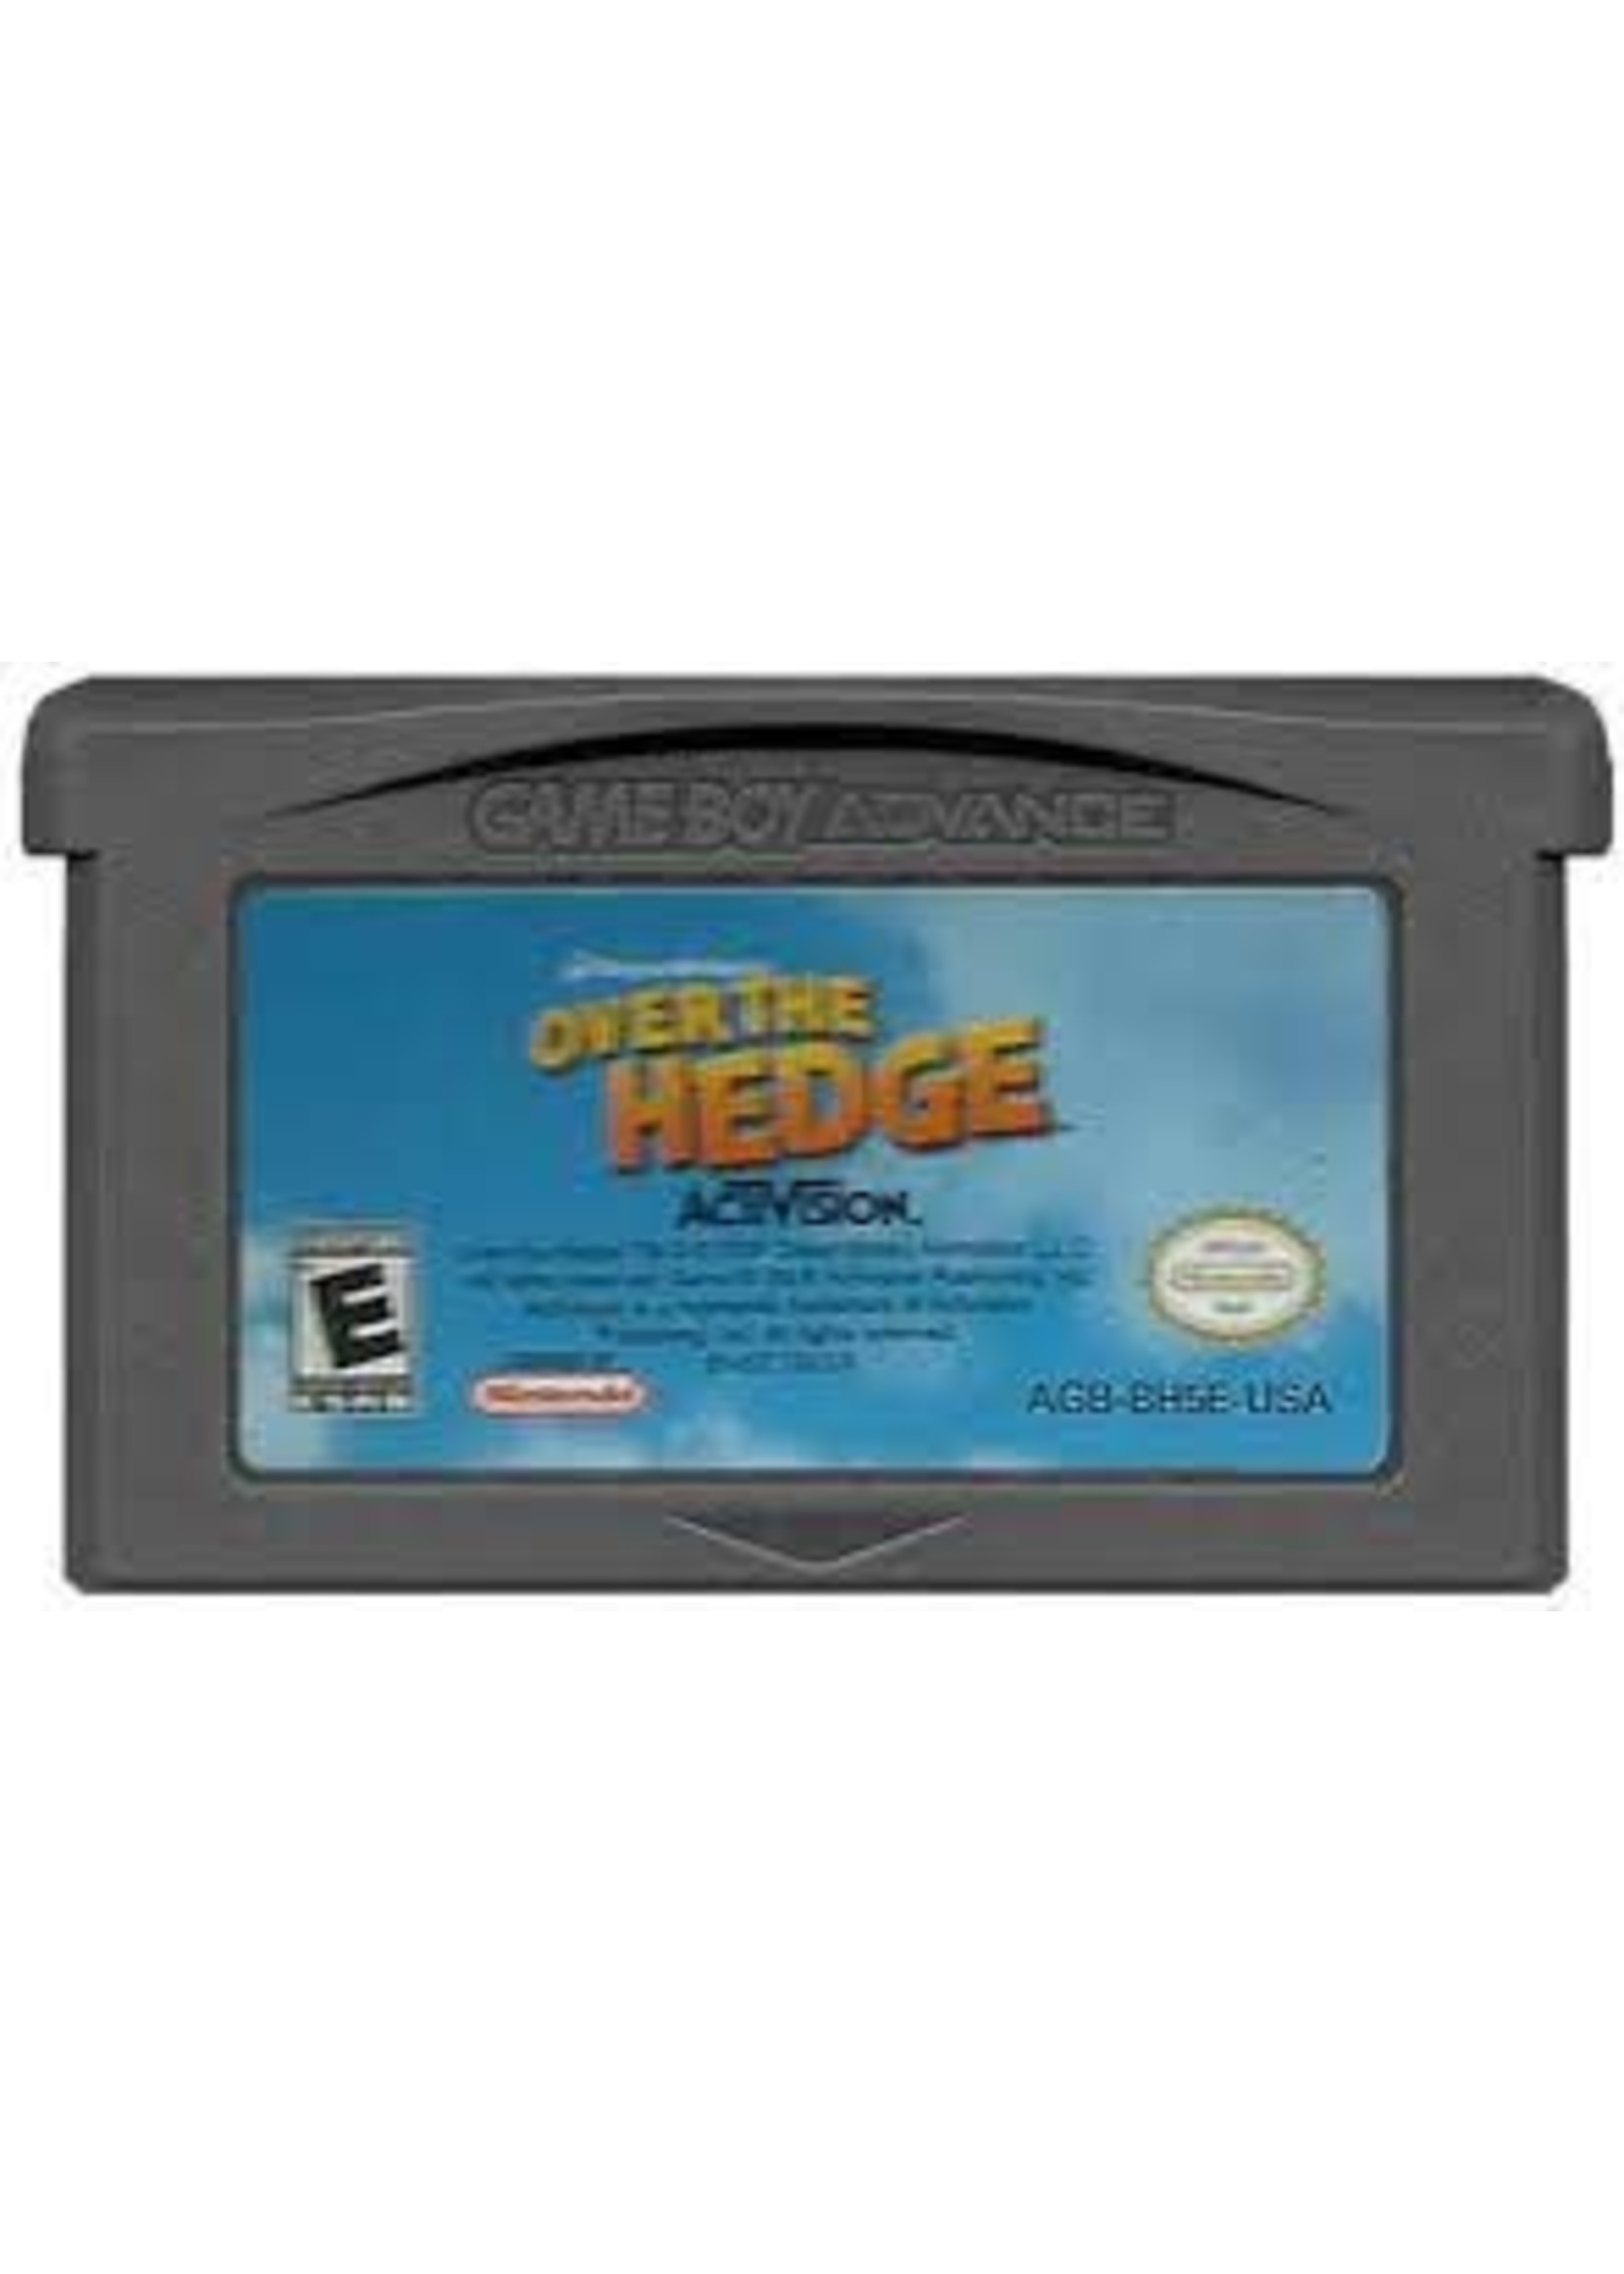 Nintendo Gameboy Advance Over the Hedge